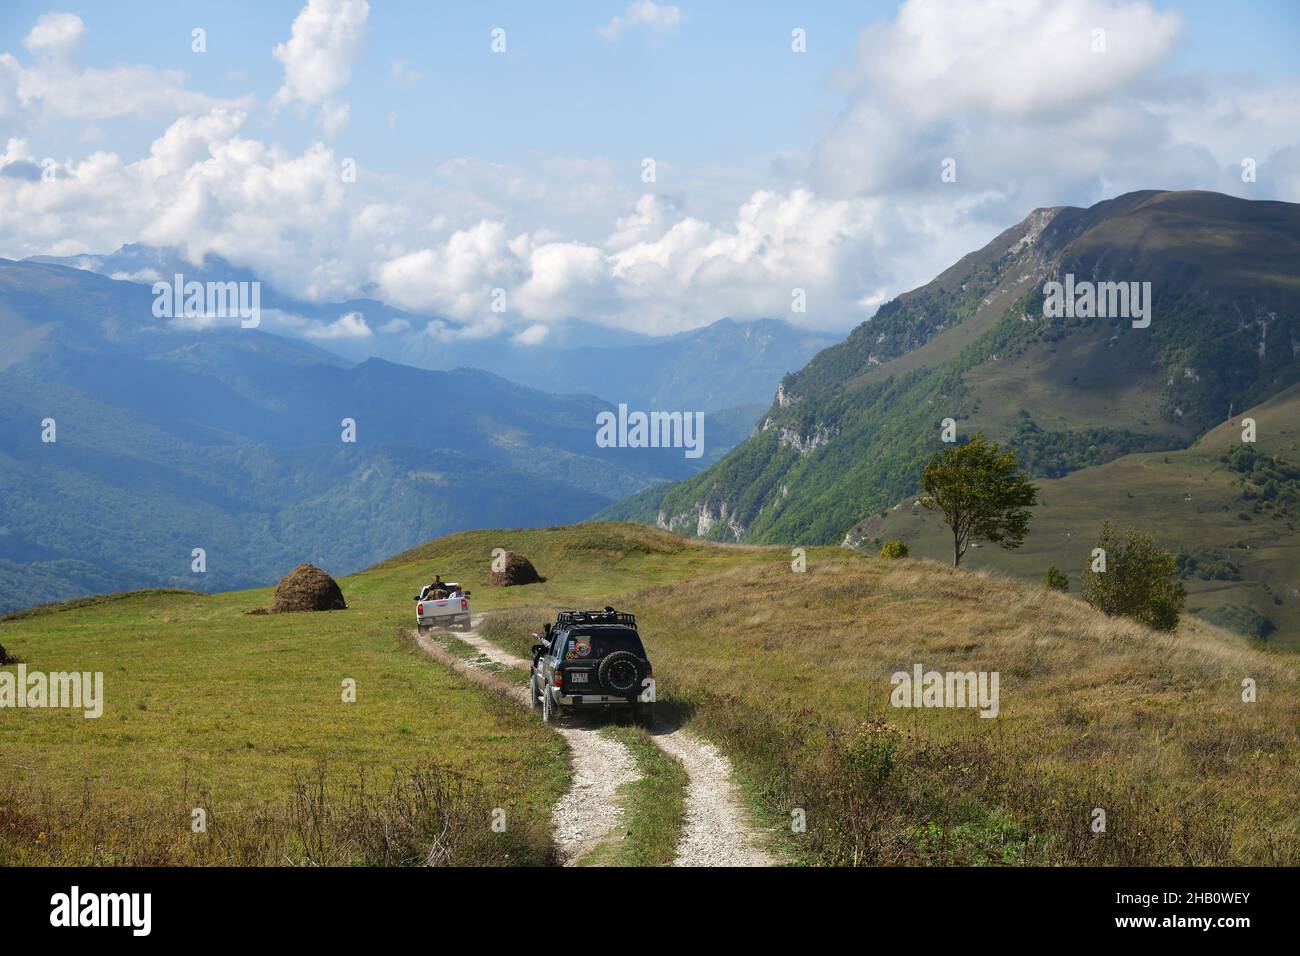 Chechnya, Russia - Sept 12, 2021: Off-road cars shown in the Caucasus mountains. Vedeno district of the Chechen Republic. Extreme mountain safari is o Stock Photo